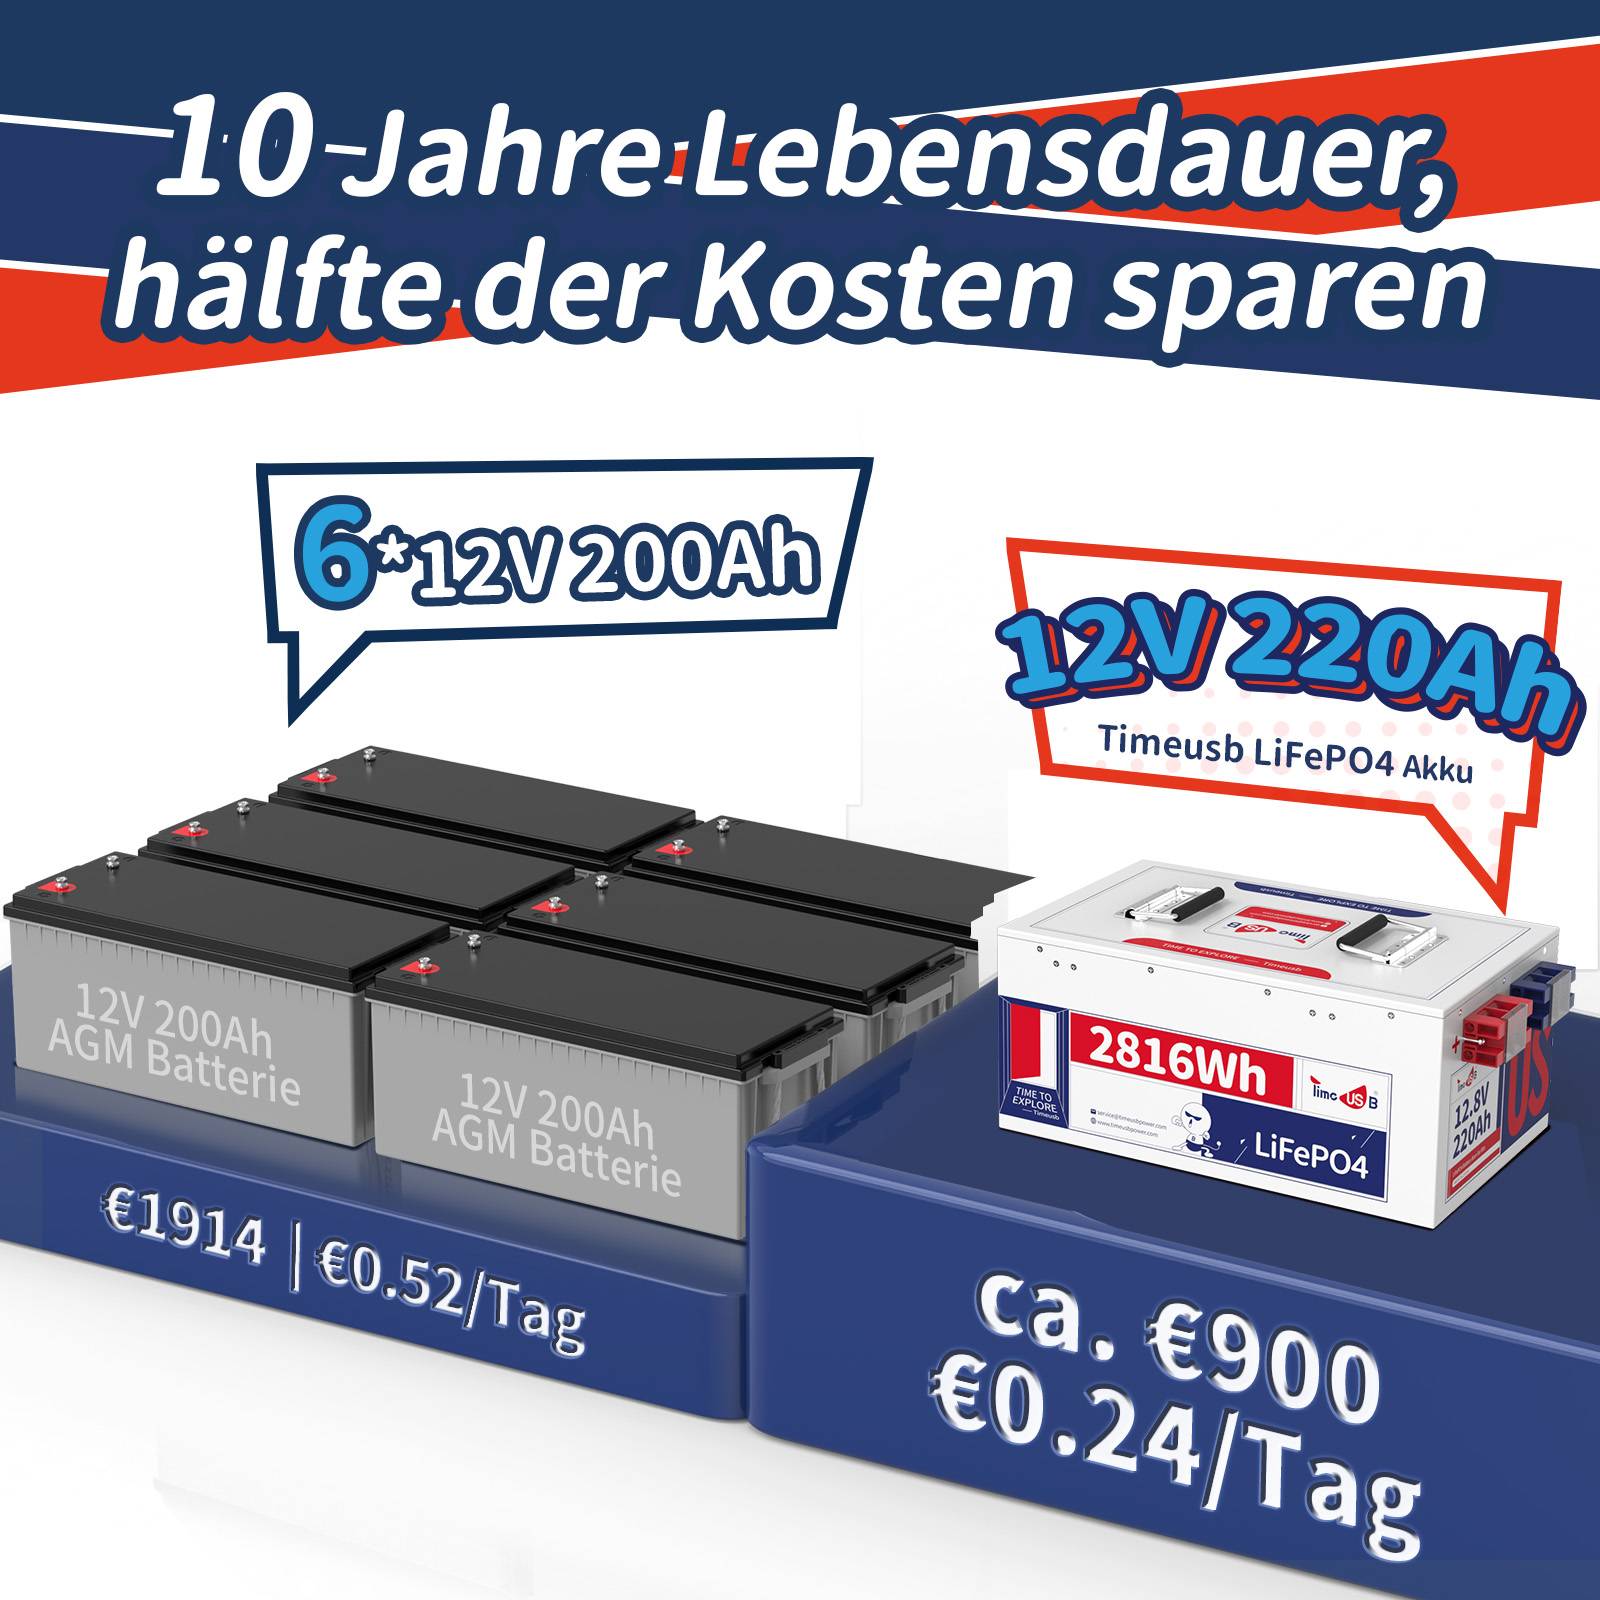 Tax free-Timeusb 12V 220Ah LiFePO4 Batterie  | 2,816 kWh & 150A BMS